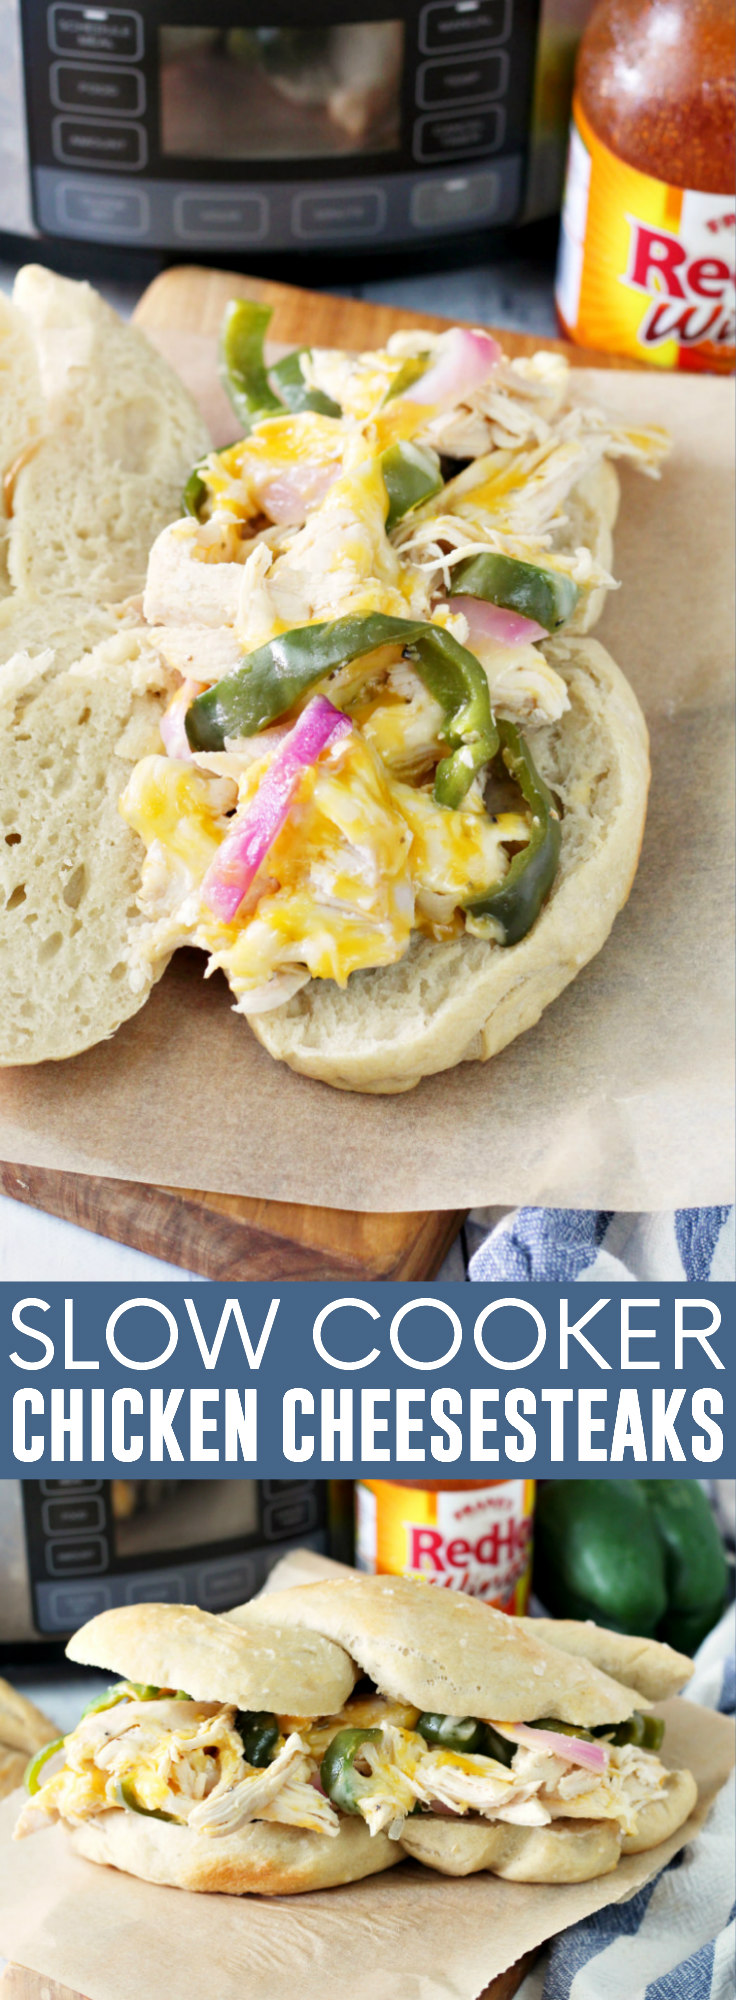 Slow Cooker Chicken Cheesesteaks pinnable image.